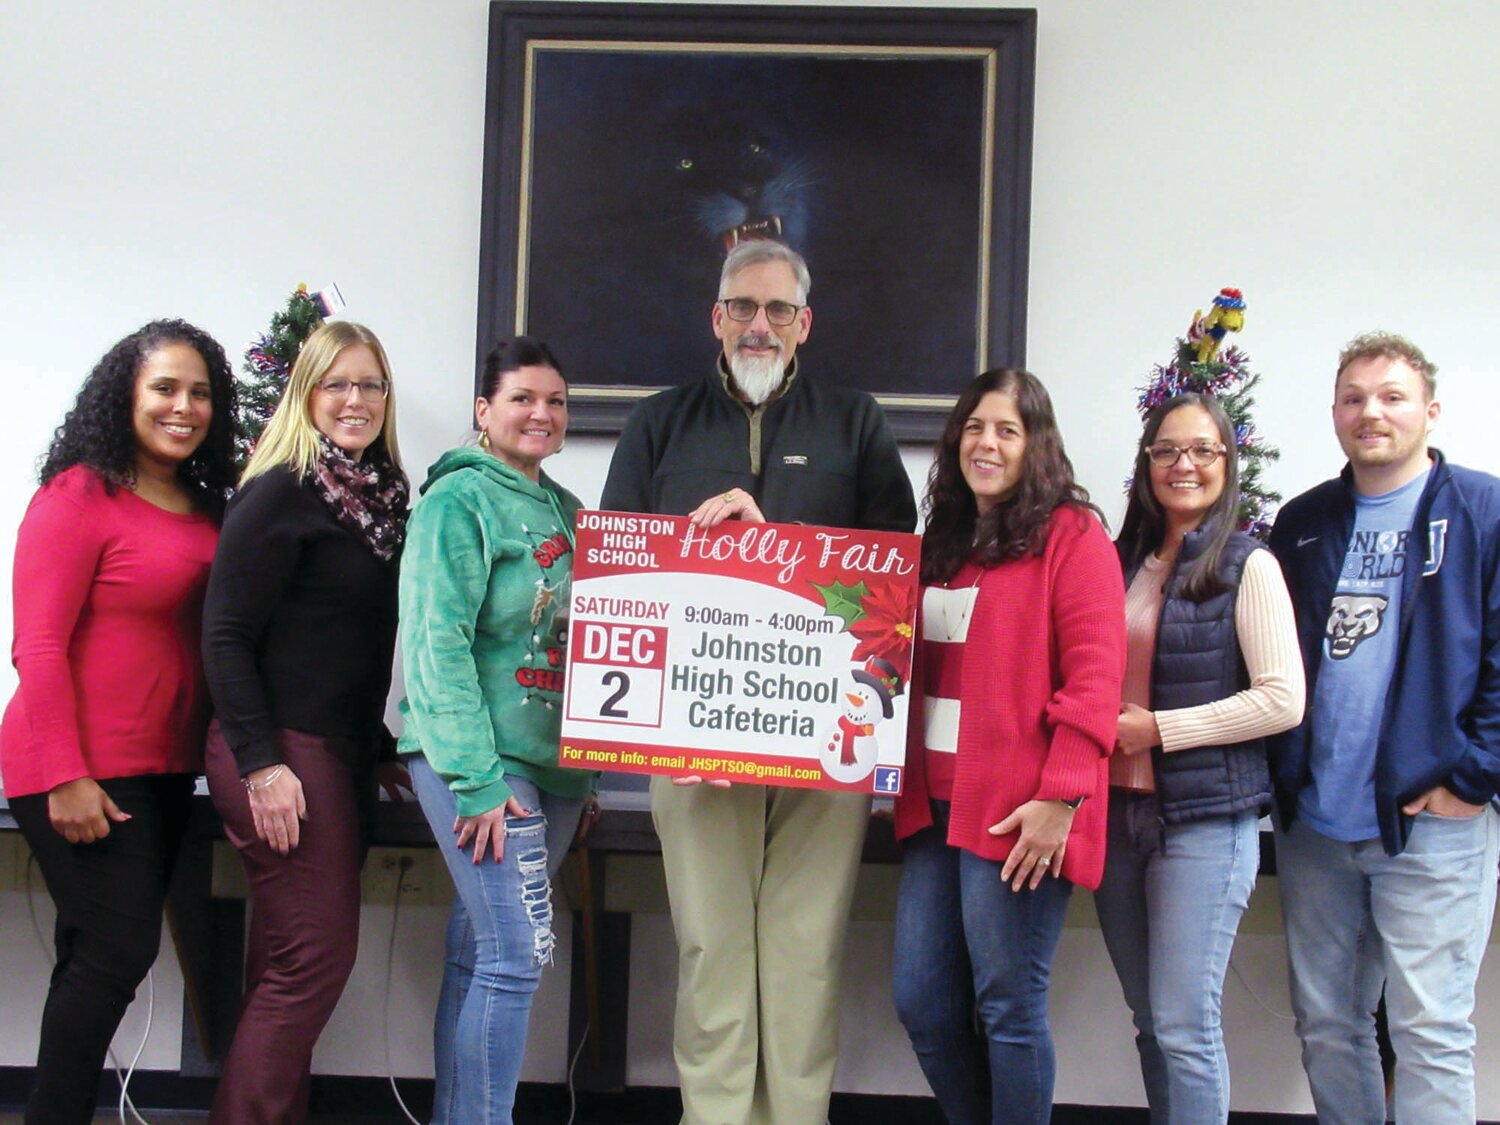 FAIR FOLKS: Lance Niles (center), president of the Johnston PTSO, holds a special sign made by Bori Graphics for this Saturday’s Holily Fair. He’s joined by committee member Lina Cruz, Rachel Salvatore, Tiffany DiBiasio, Angela Niles, Susana Cuellar-Daza and Mike Harwood.